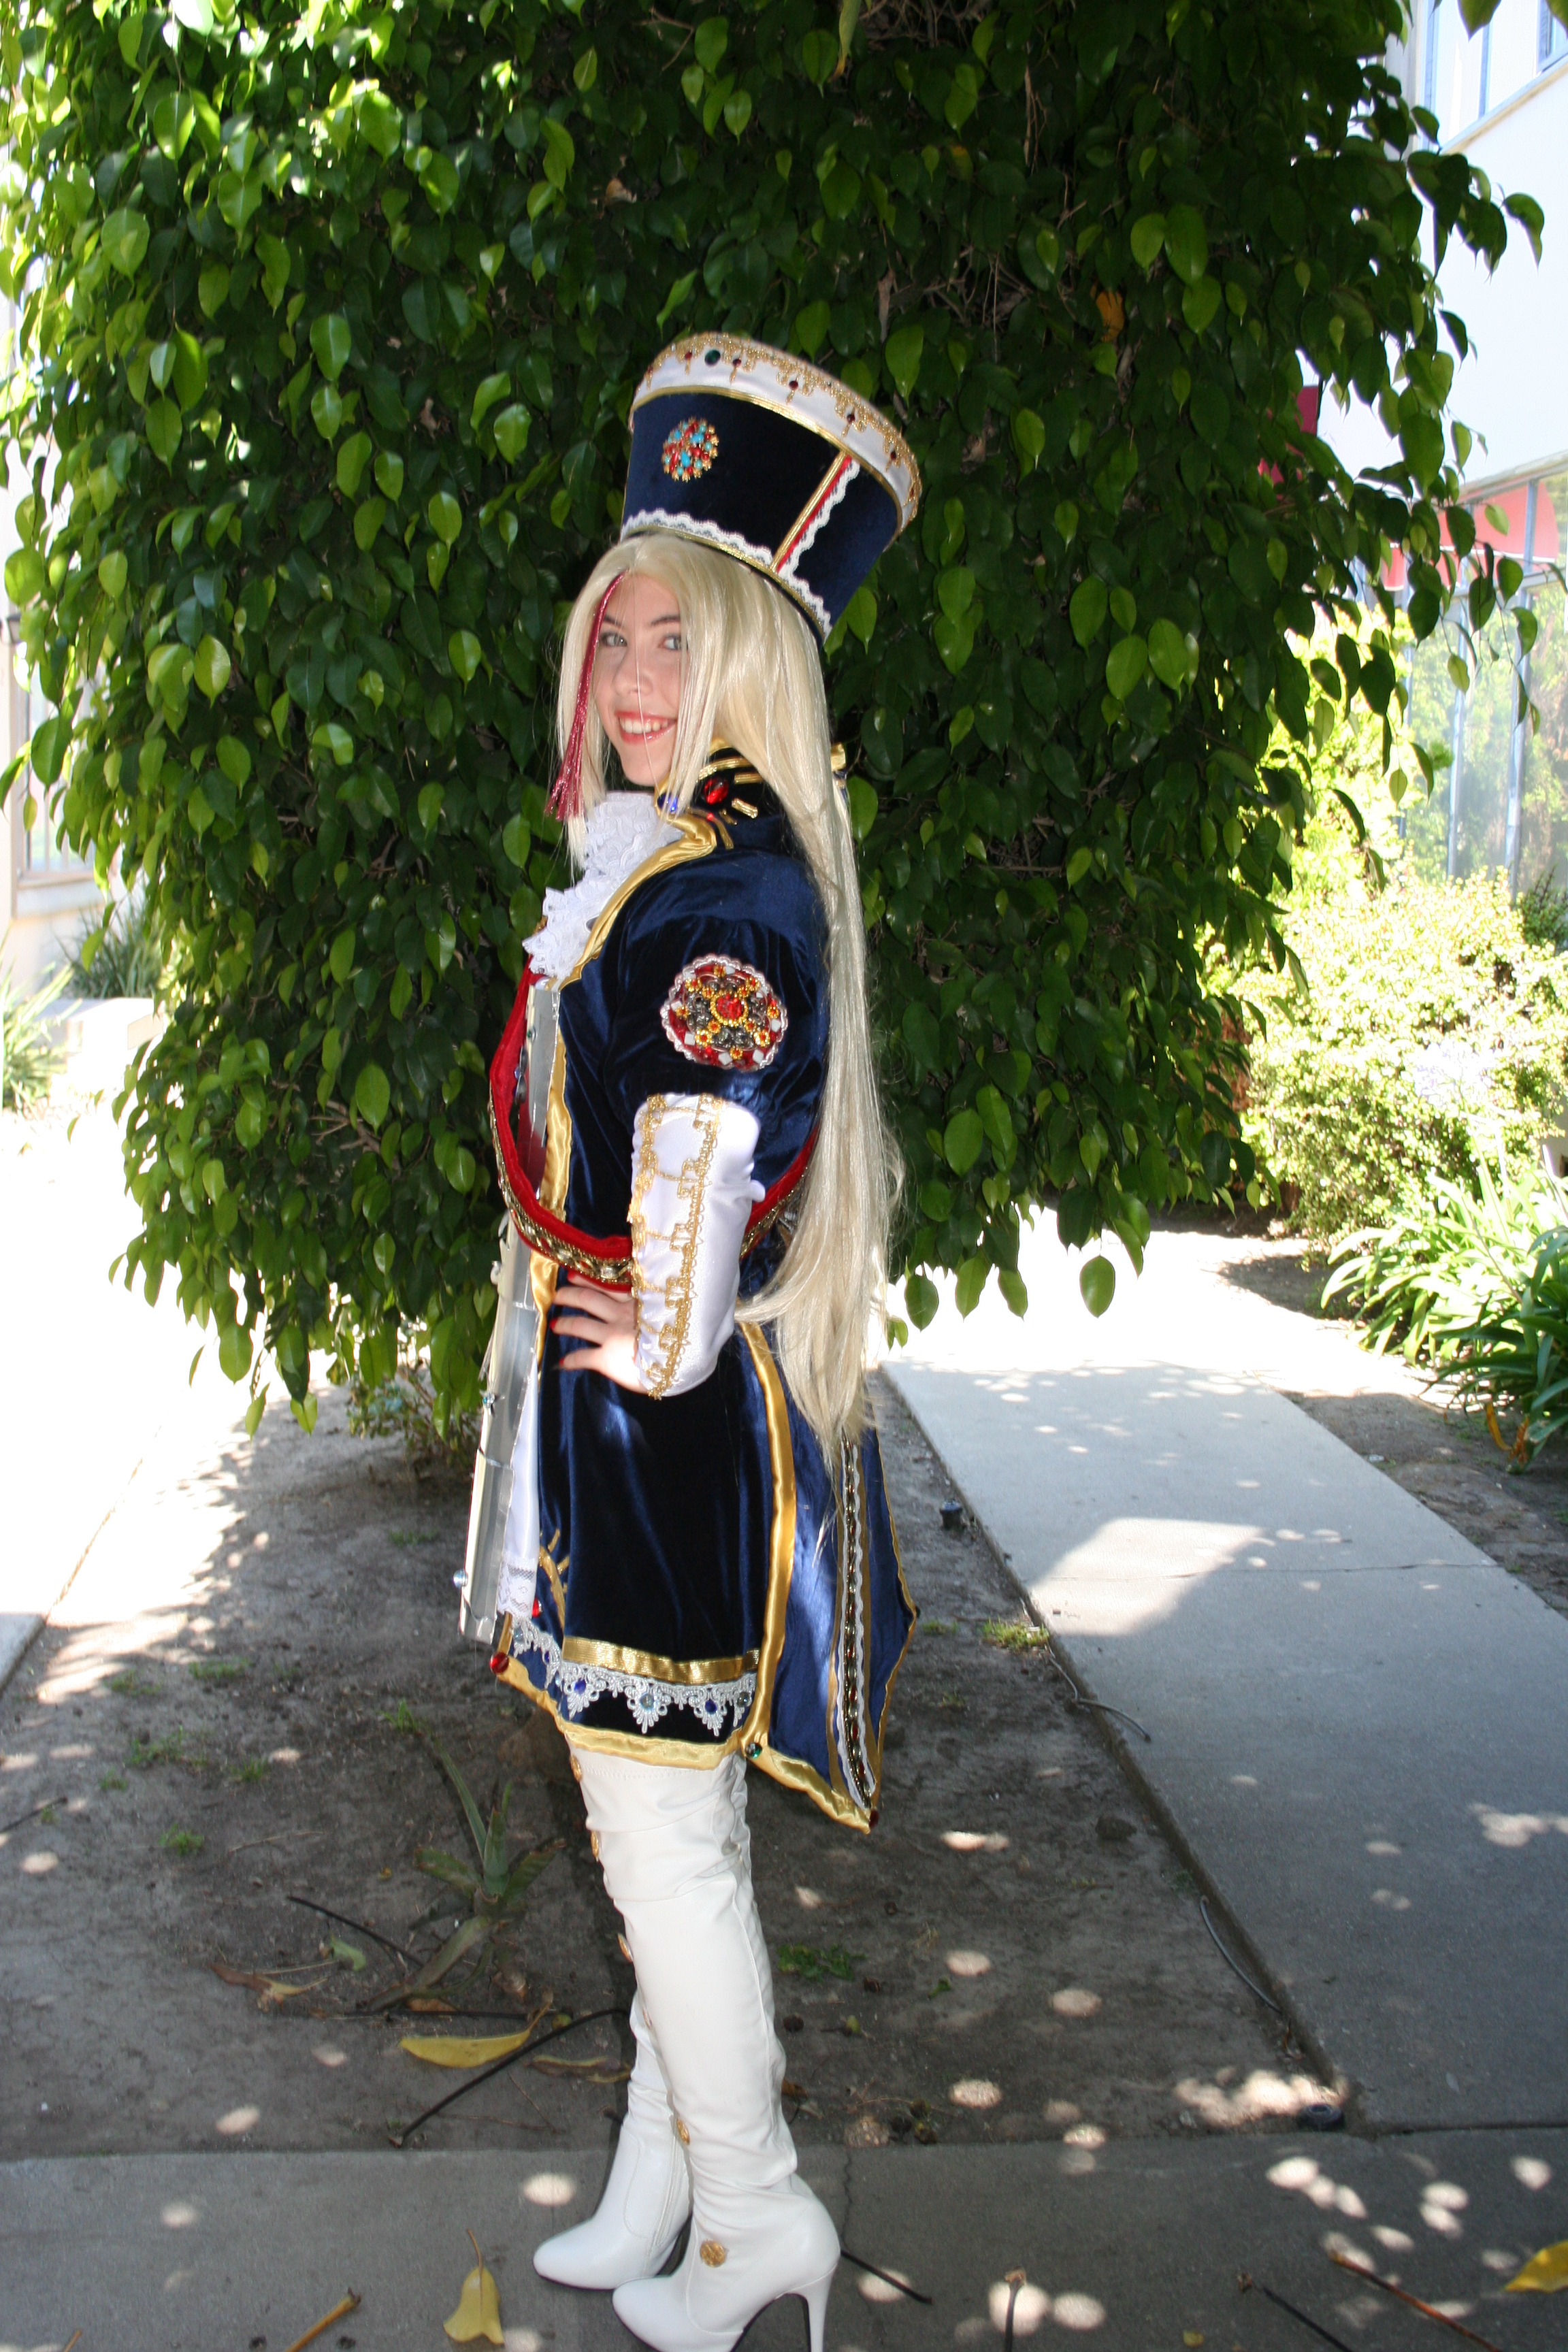 Kaleigh as Atharoshe Asran at the Anime Convention